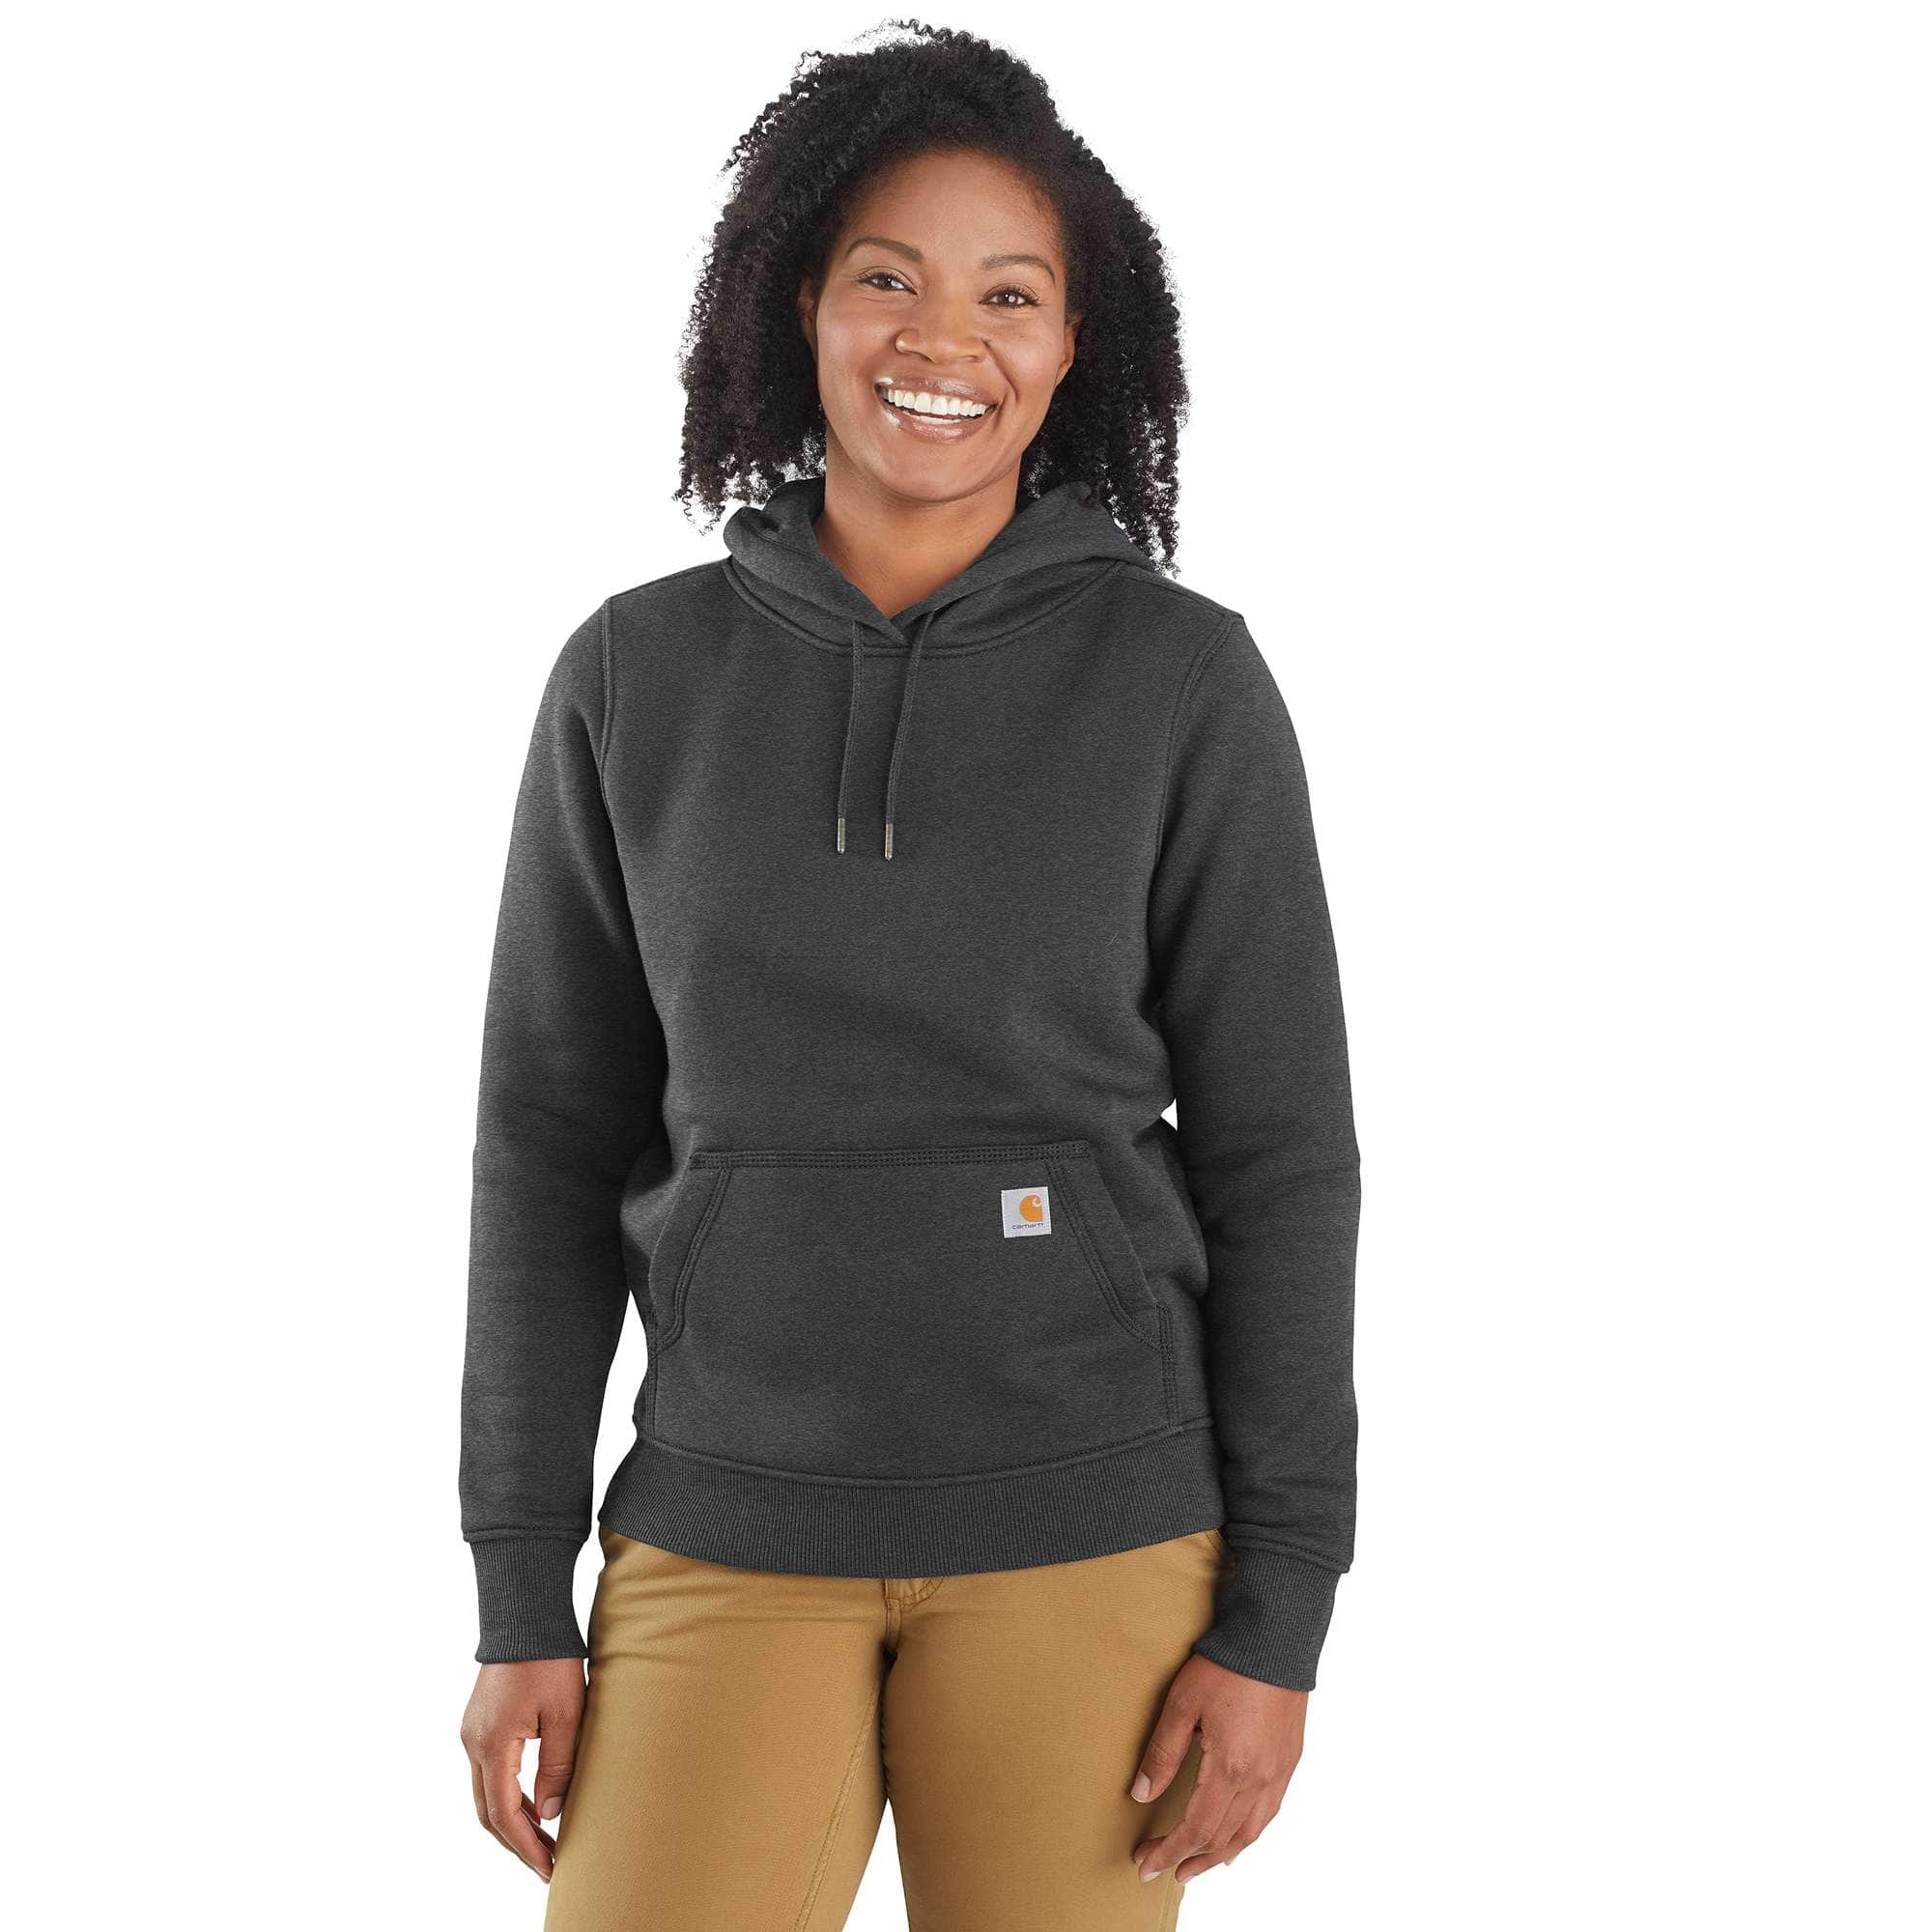 Women's Relaxed Fit Midweight Hoodie, Women's Best Sellers